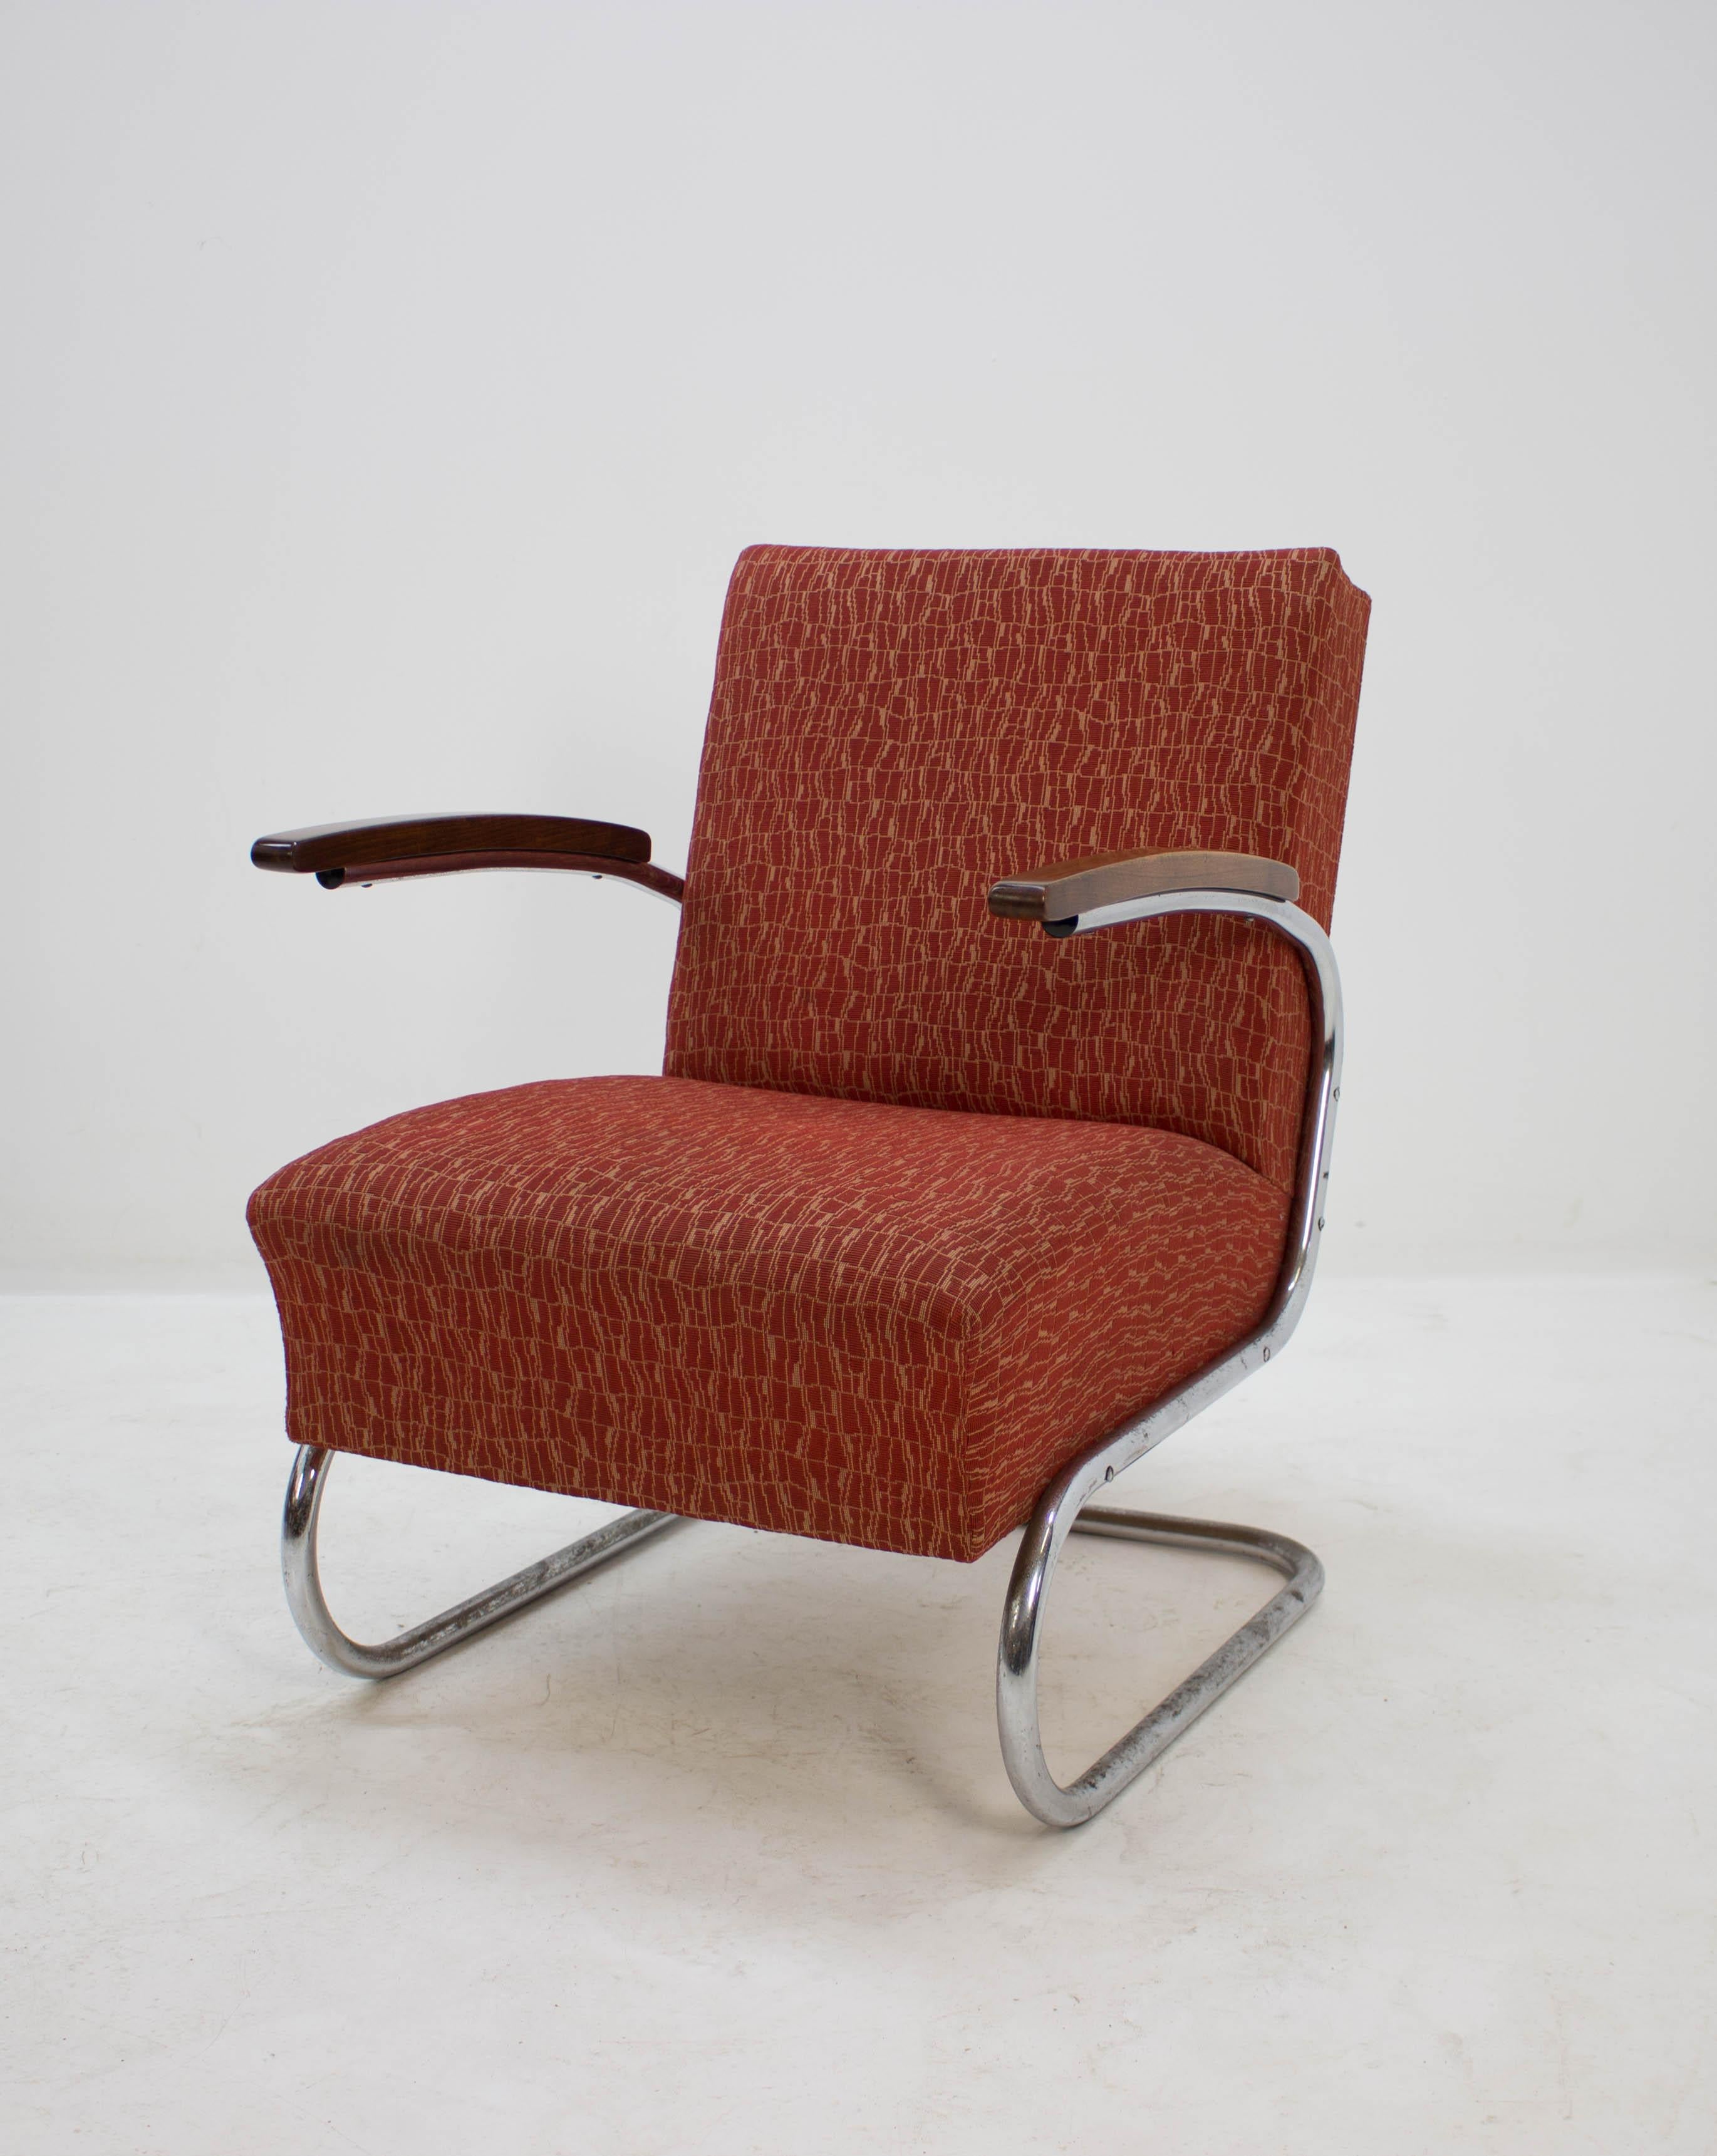 Iconic armchair type S411 on a chrome frame by Mücke Melder, designed in 1932. Original upholstery in very good condition - cleaned. Armrest restored and polished